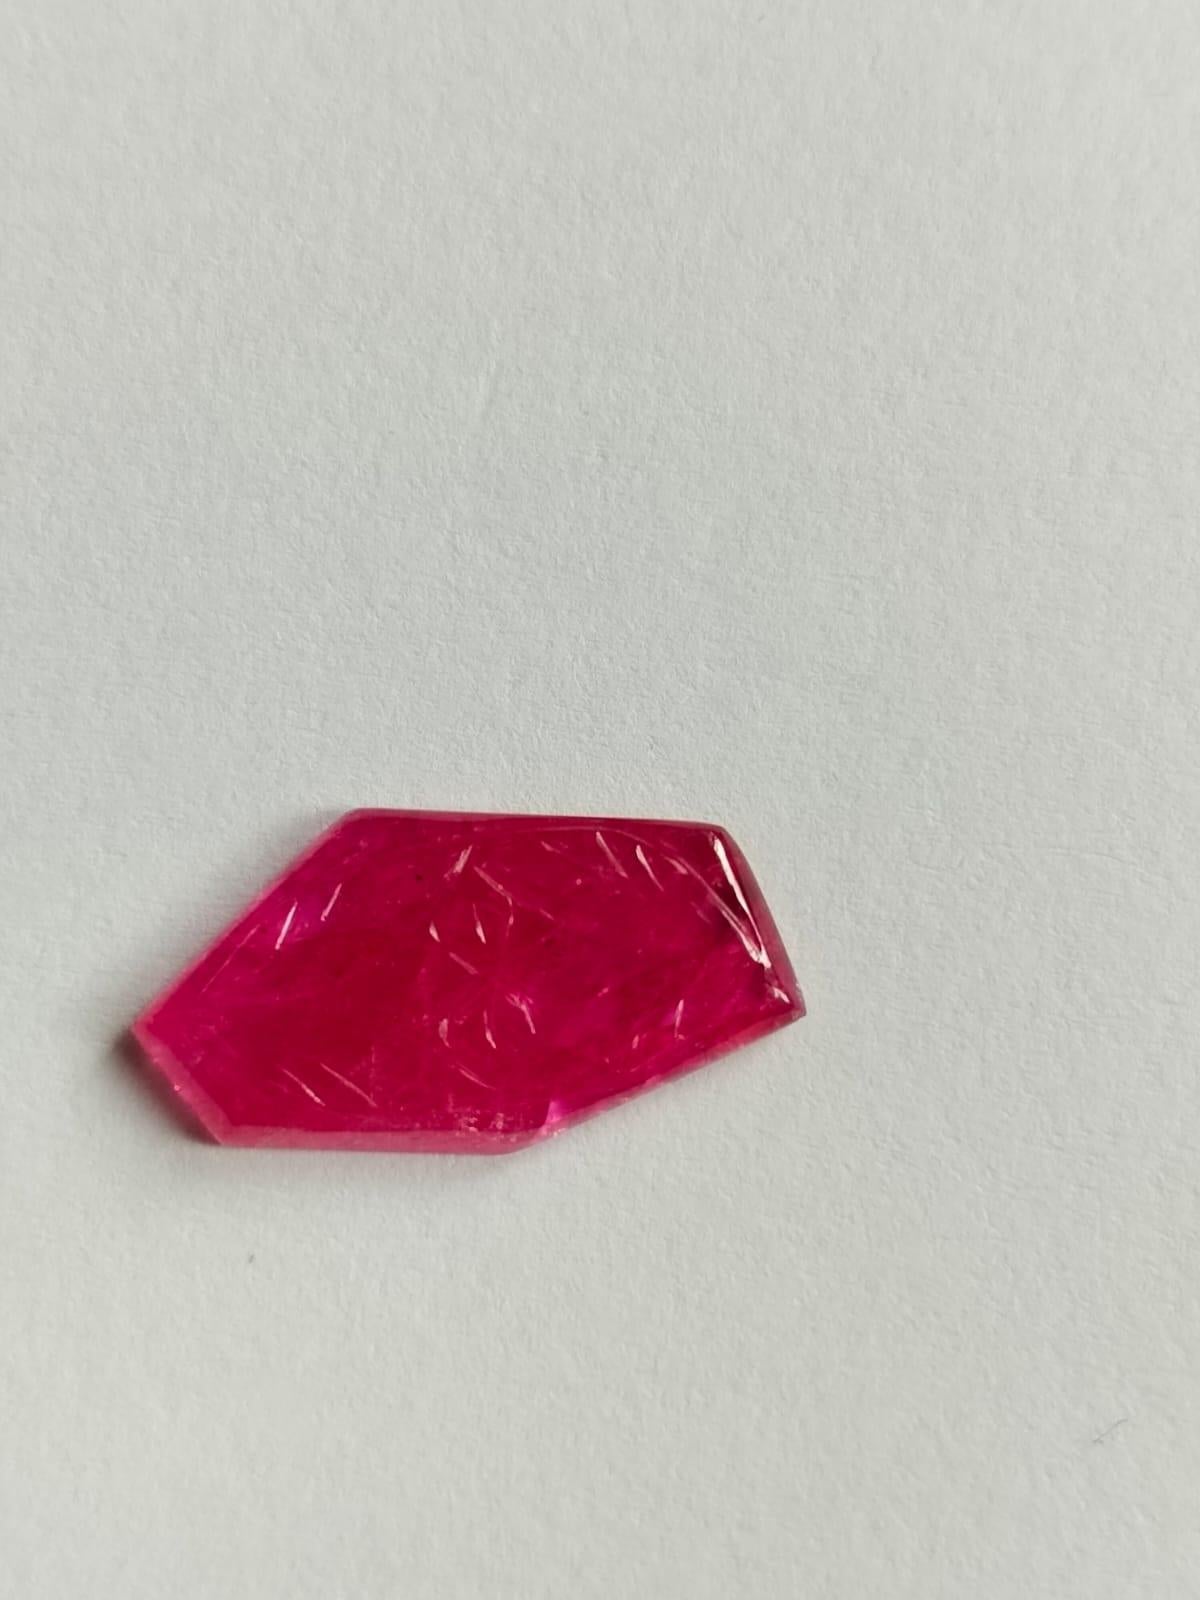 Natural Red Ruby Handmade Carving Fancy Gemstone.
8.22 Carat with a elegant Red color and excellent clarity. Also has an excellent fancy carving with ideal polish to show great shine and color . It will look authentic in jewelry. The dimensions of